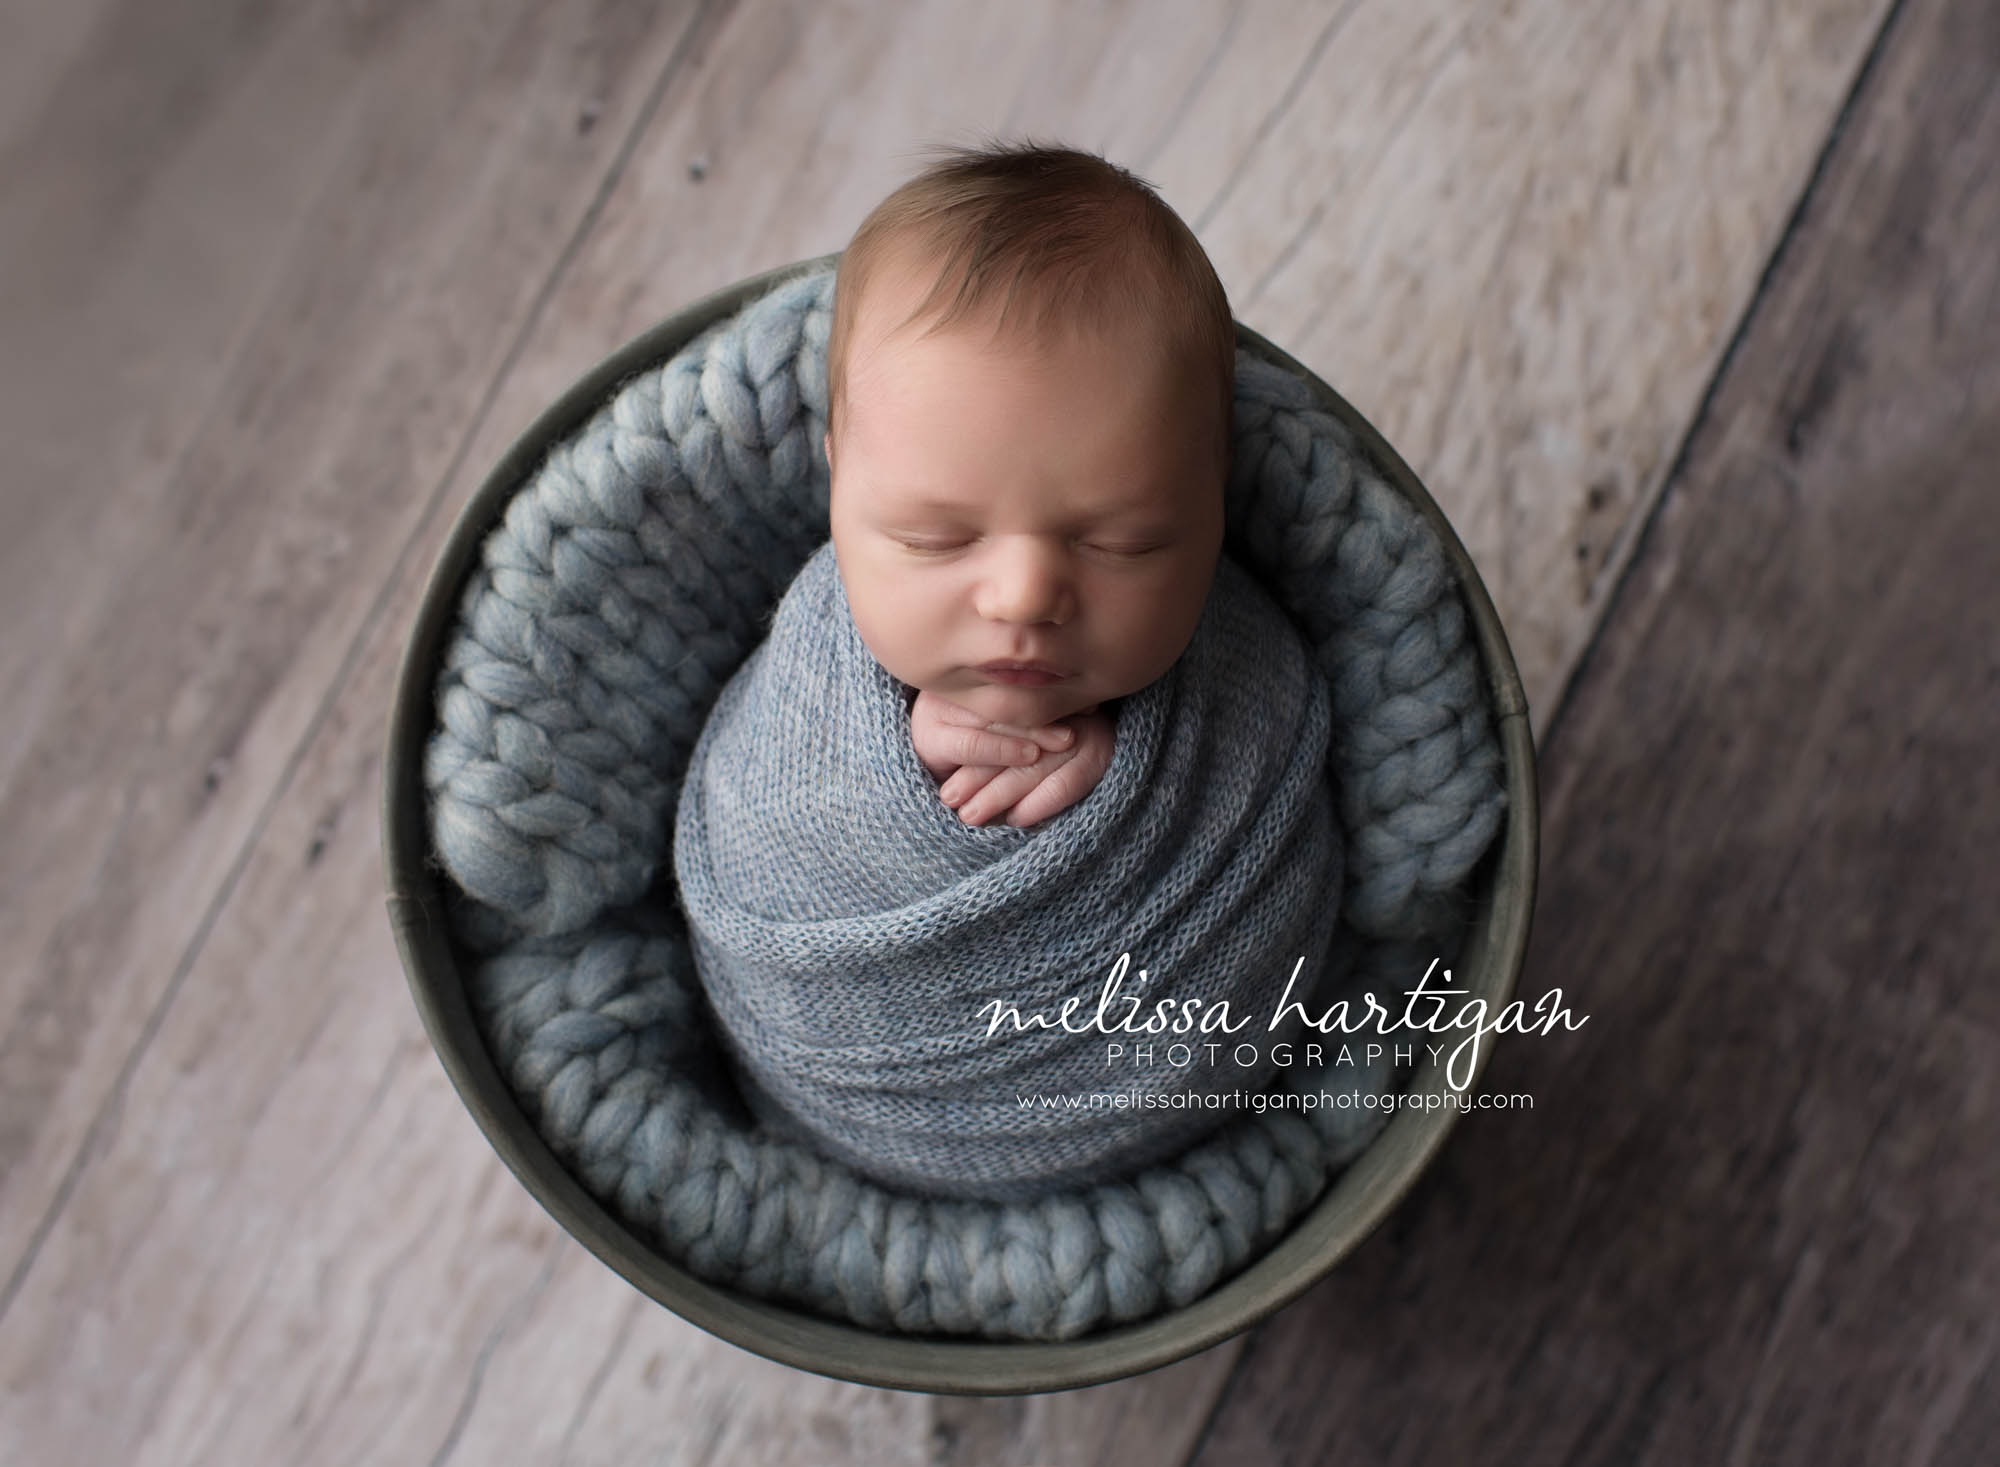 Melissa Hartigan Photography Coventry CT Simply Swaddled Newborn Session baby boy wrapped in blue knit wrap laying on chunky blue blanket in a bucket